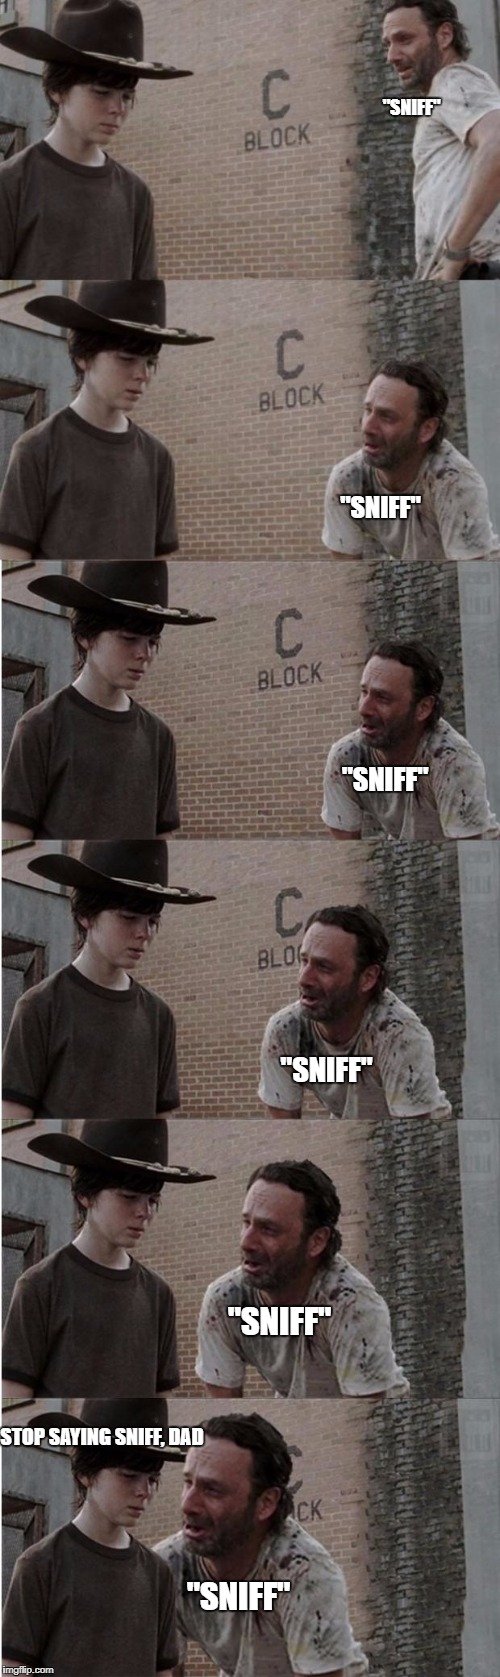 Annoying Dad | "SNIFF"; "SNIFF"; "SNIFF"; "SNIFF"; "SNIFF"; STOP SAYING SNIFF, DAD; "SNIFF" | image tagged in memes,rick and carl longer,annoying dad | made w/ Imgflip meme maker